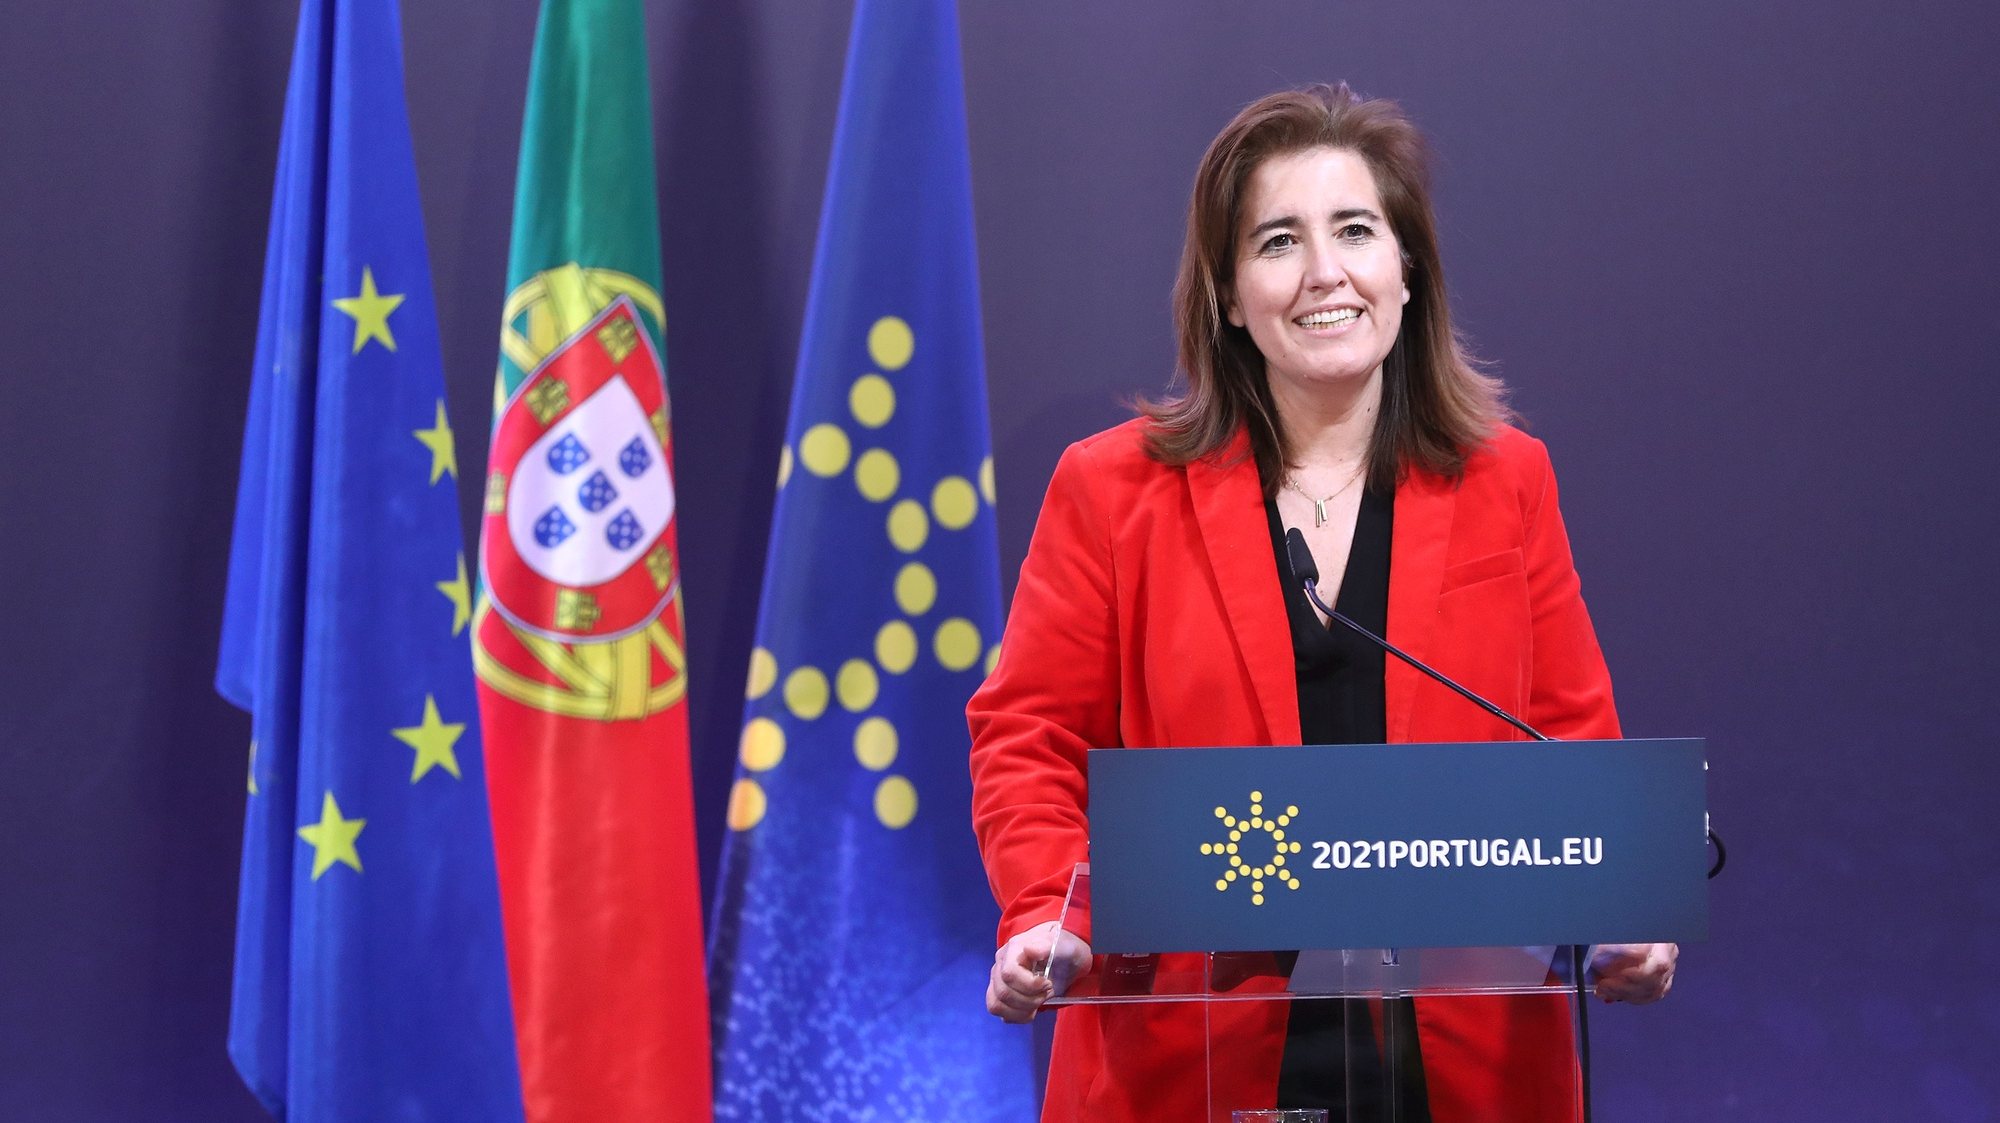 Portuguese Minister of Labour, Solidarity and Social Security, Ana Mendes Godinho, attends a press conference after a Informal video conference of Ministers for Employment, Social Policy, Health and Consumer Affairs (EPSCO) under the theme “Jobs, Qualifications and Cohesion: Priorities of a Stronger Social Europe”, in Lisbon, Portugal, 22 February 2021. The purpose of these talks was for the Member States to be able to present their contributions and share their ambitions regarding the Action Plan on the Implementation of the European Pillar of Social Rights, which will be presented to by the European Commission in March. ANTONIO PEDRO SANTOS/LUSA